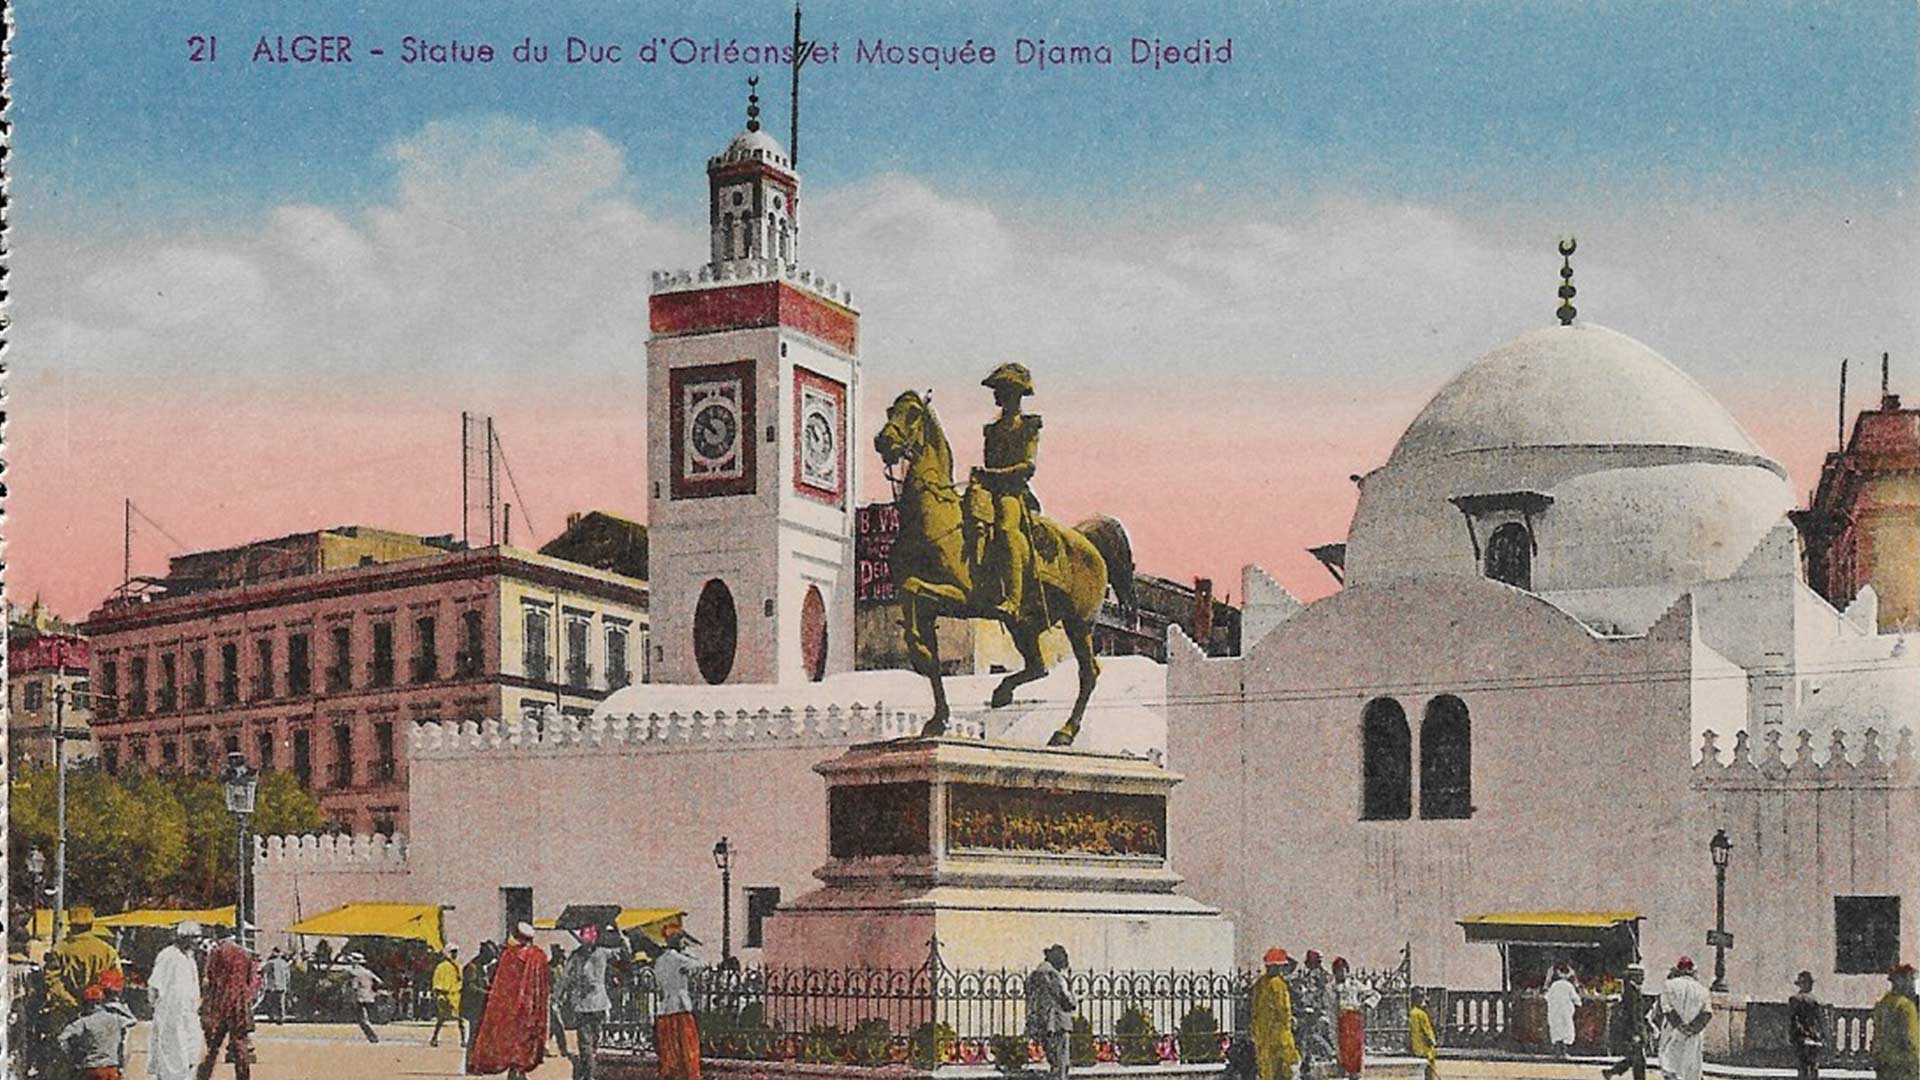 Algiers to Neuilly: The Duc d’Orléans Statue